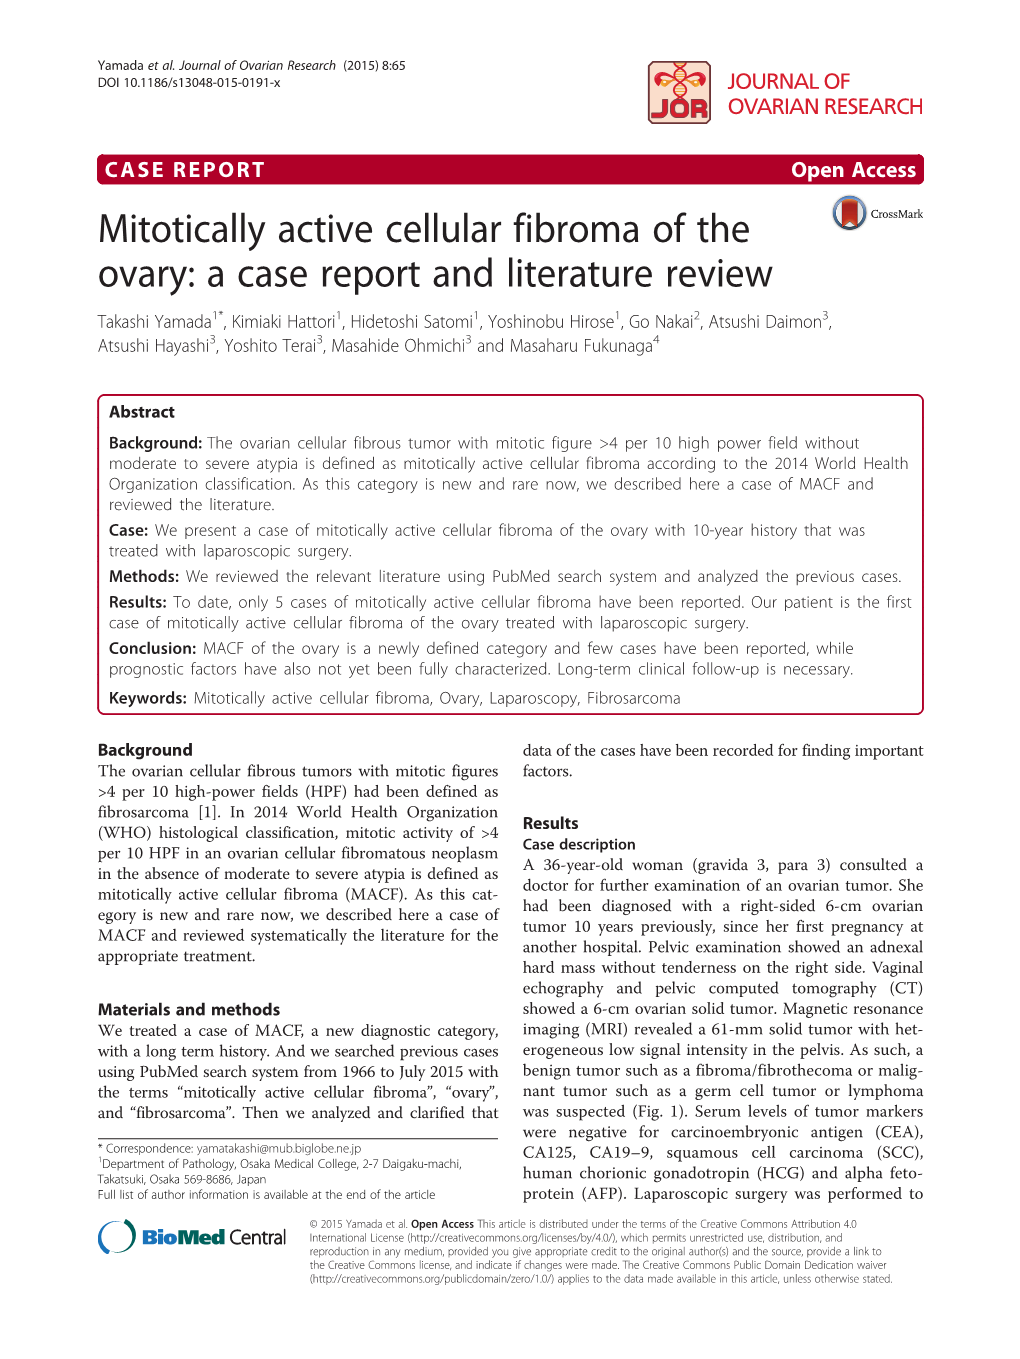 Mitotically Active Cellular Fibroma of the Ovary